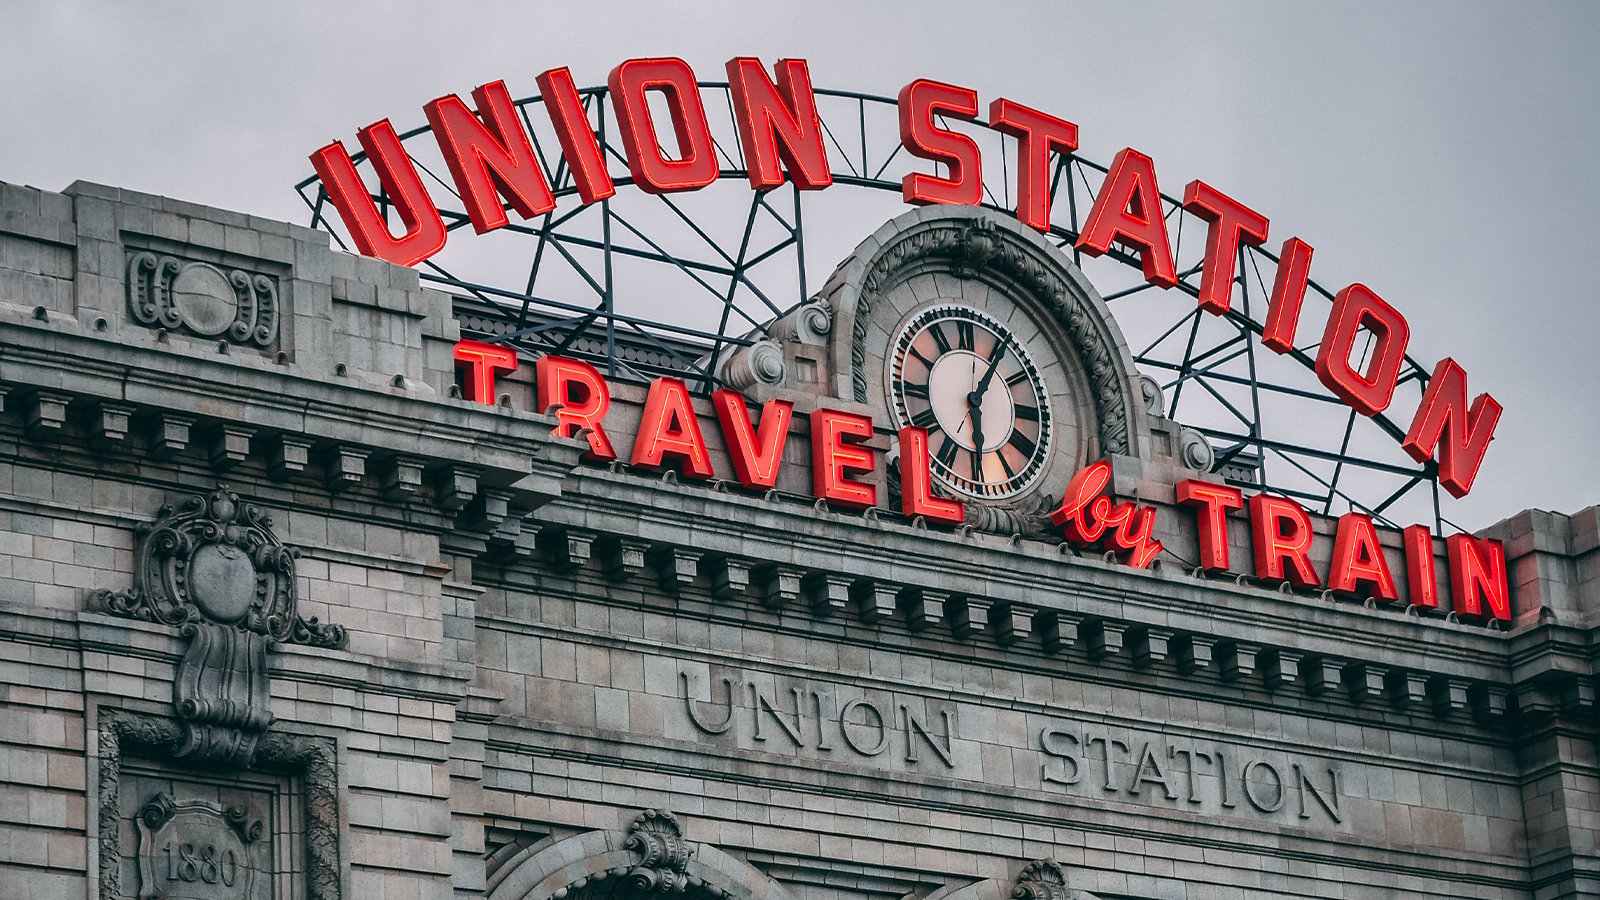 An image of the neon sign at Union Station in Denver, CO.